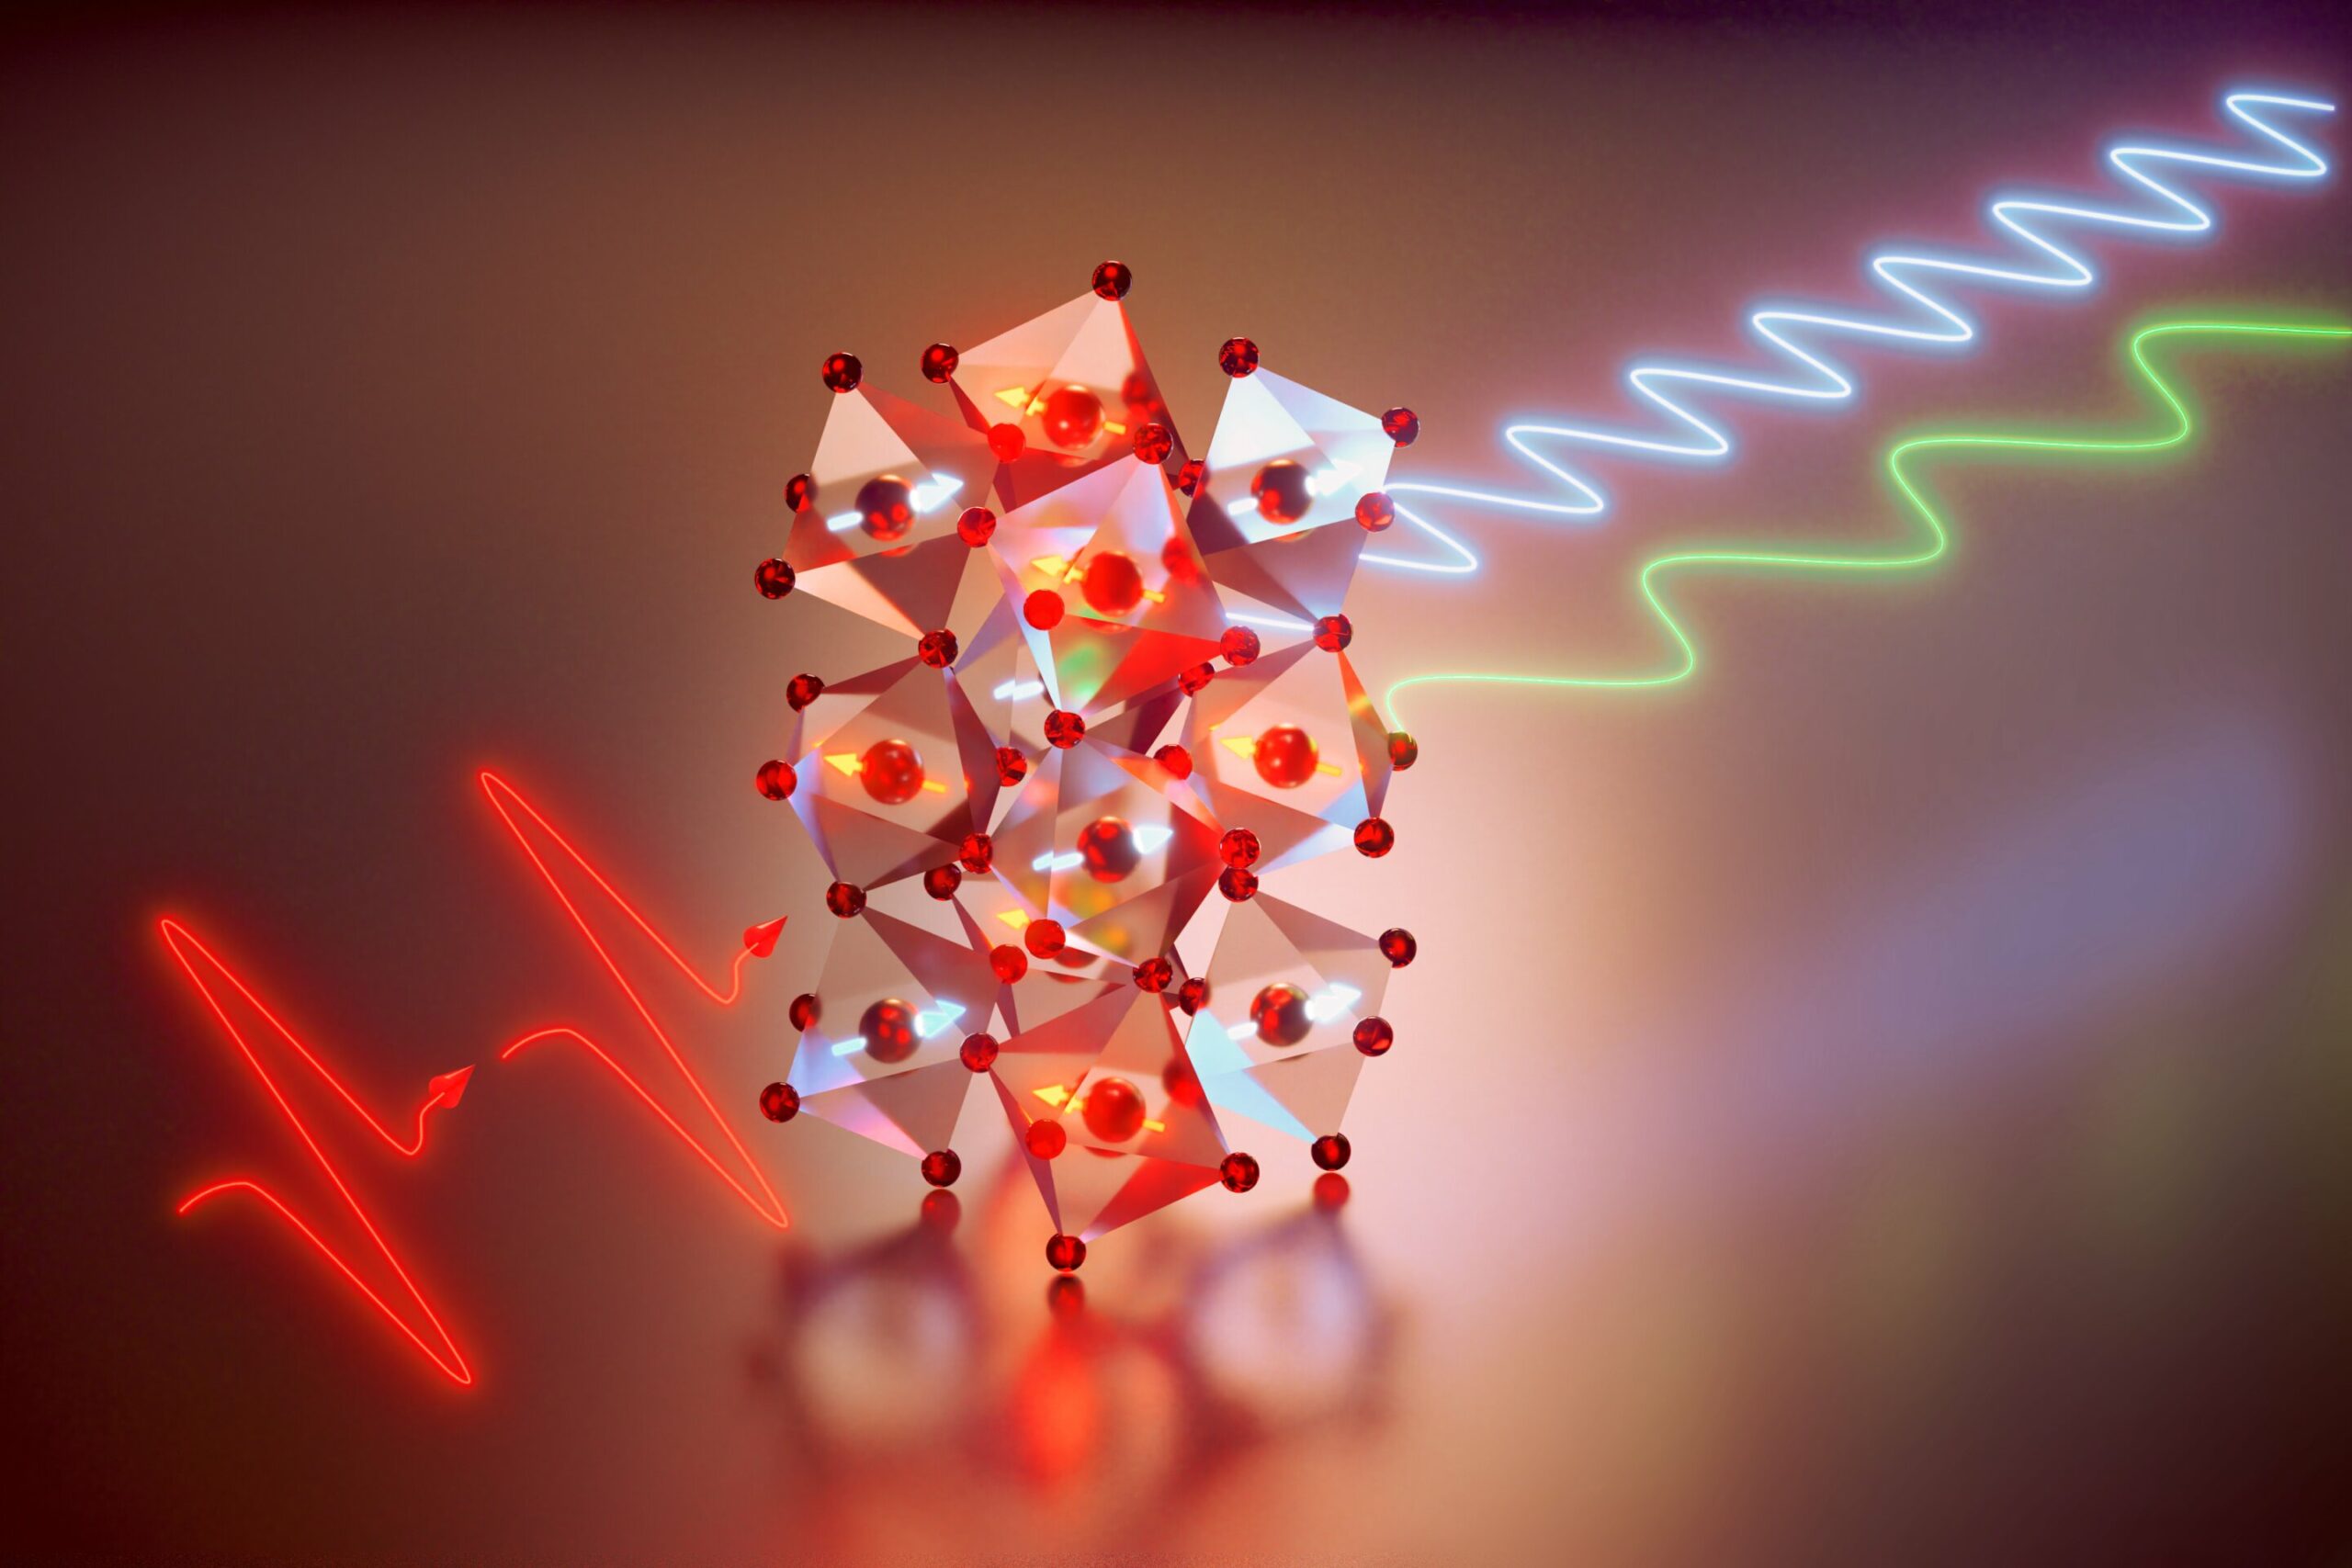 Researchers Uncover Novel Approaches to Stimulate Spin Waves Using Intense Infrared Light